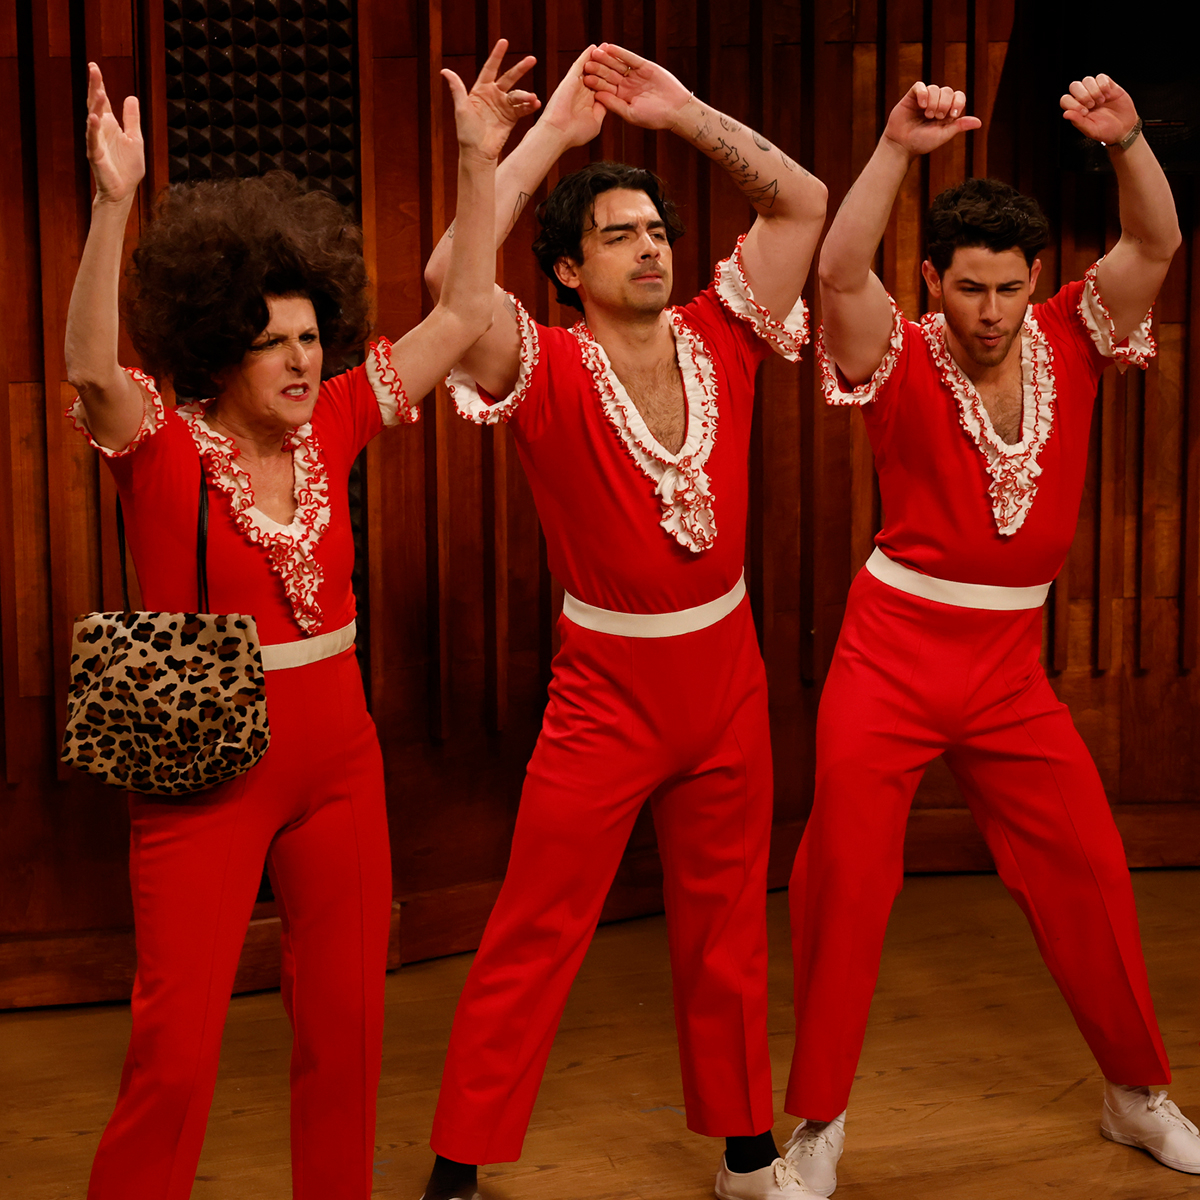 Jonas Brothers Twin With Molly Shannon’s Sally O’Malley on SNL